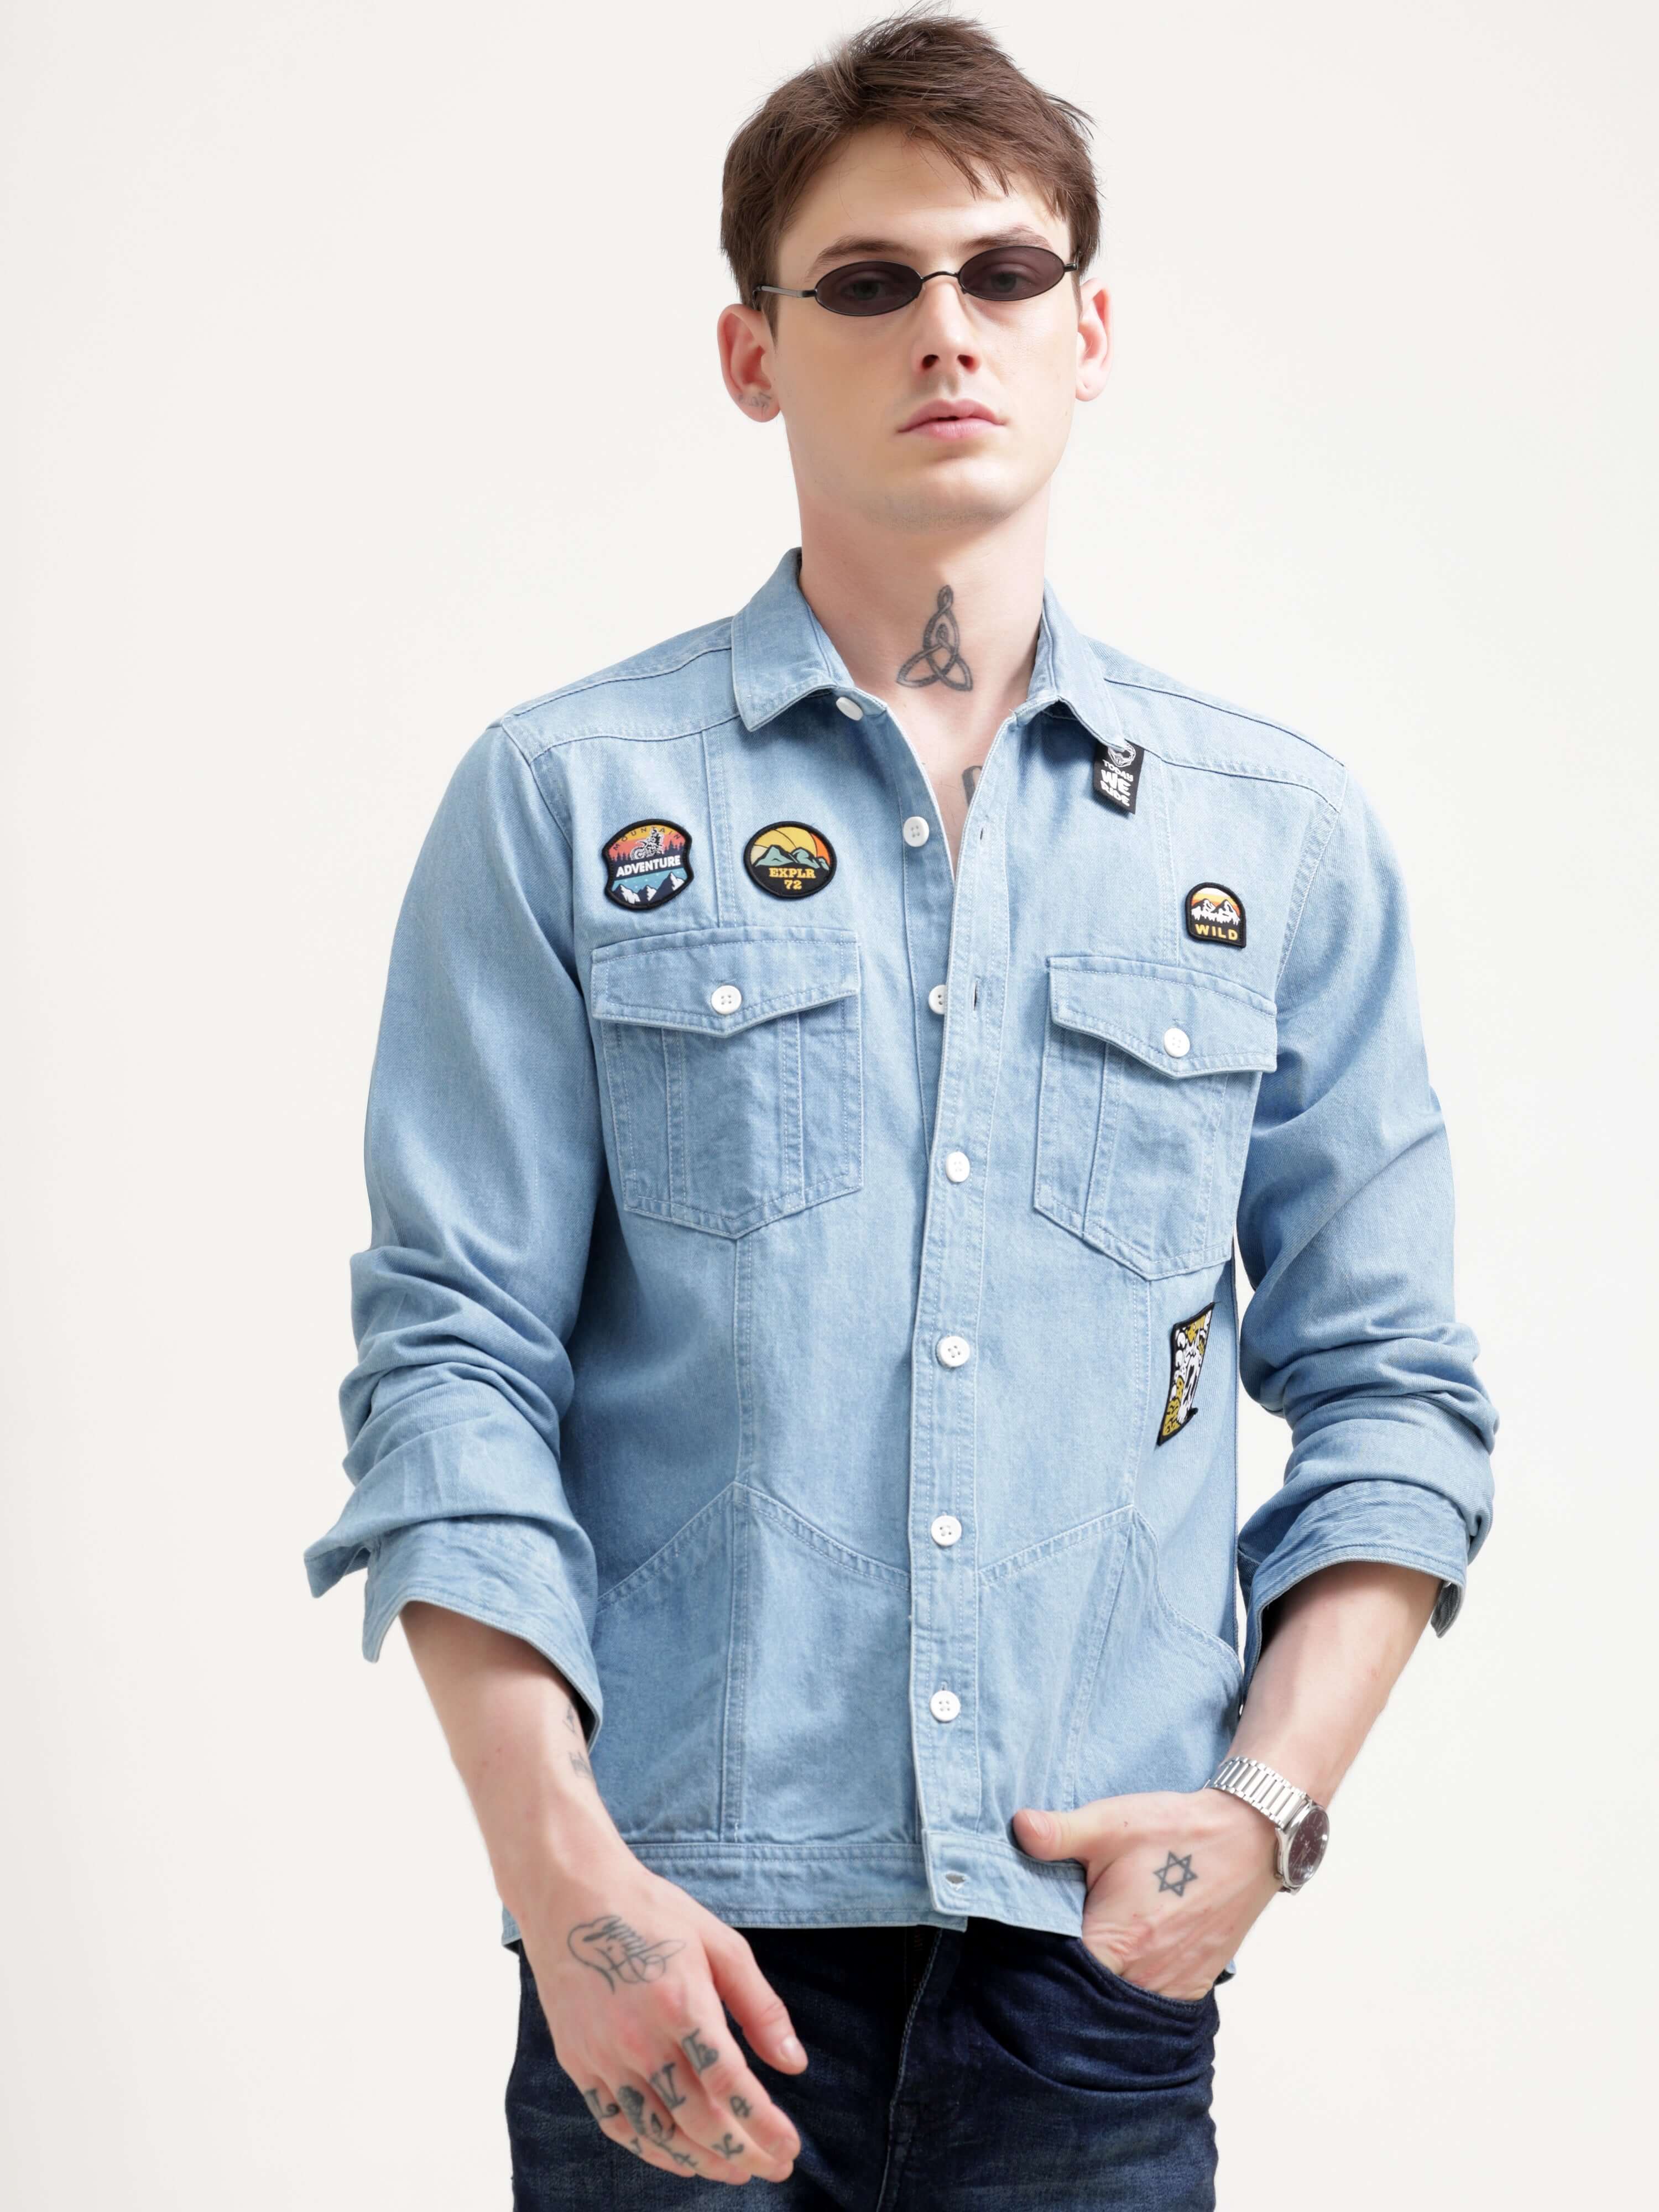 Ice Blue Denim Street Overshirt - Men's Casual Wear shop online at Estilocus. Elevate your wardrobe with the Ice Blue Denim Street Overshirt. Features a unique design, regular fit, and double front pockets. Perfect for casual chic.